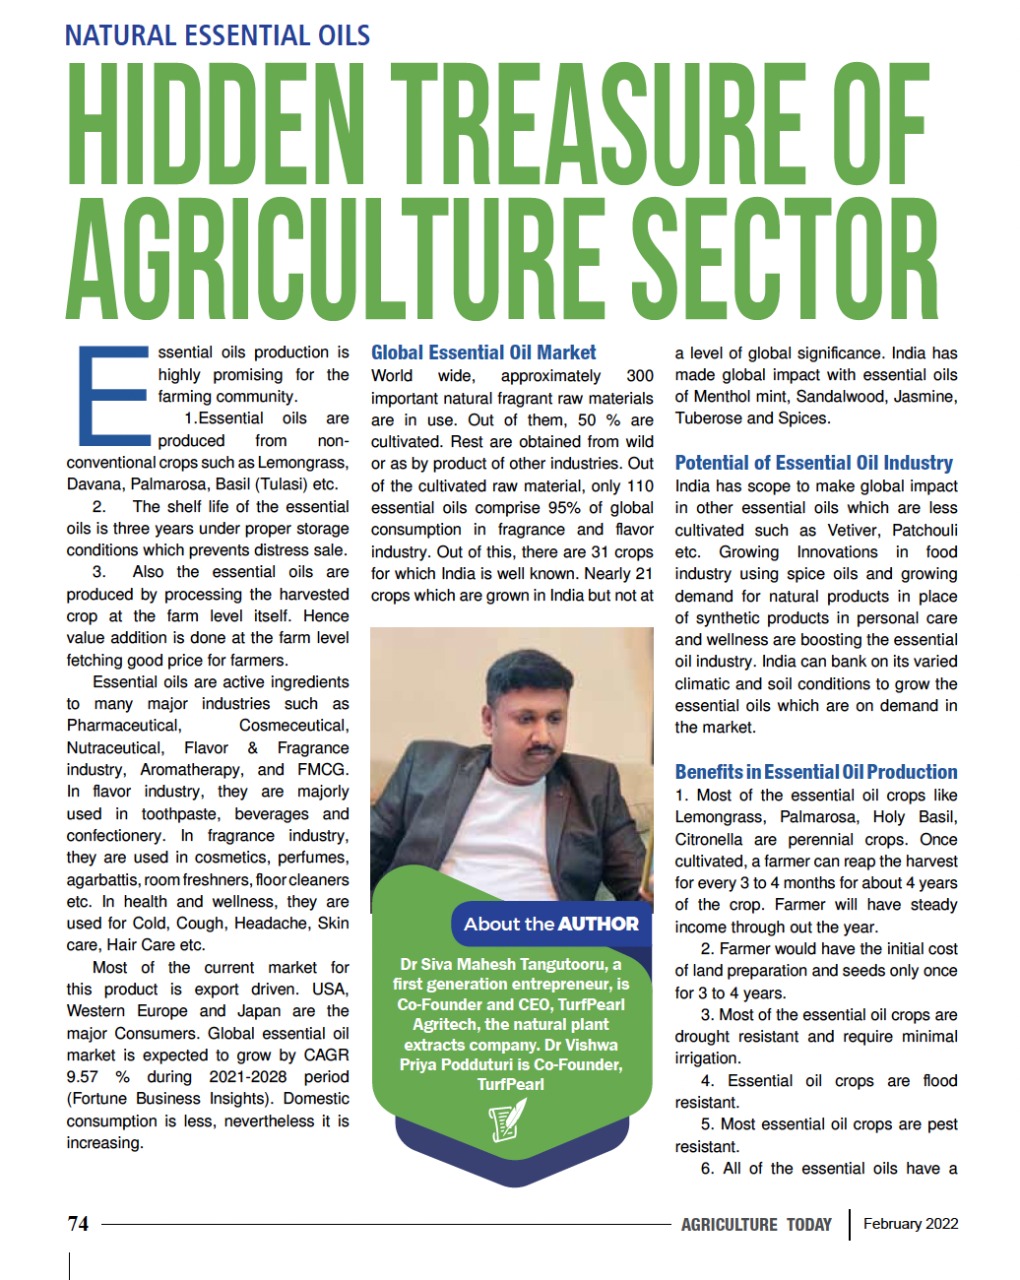 TP agriculture today article 1.jpeg